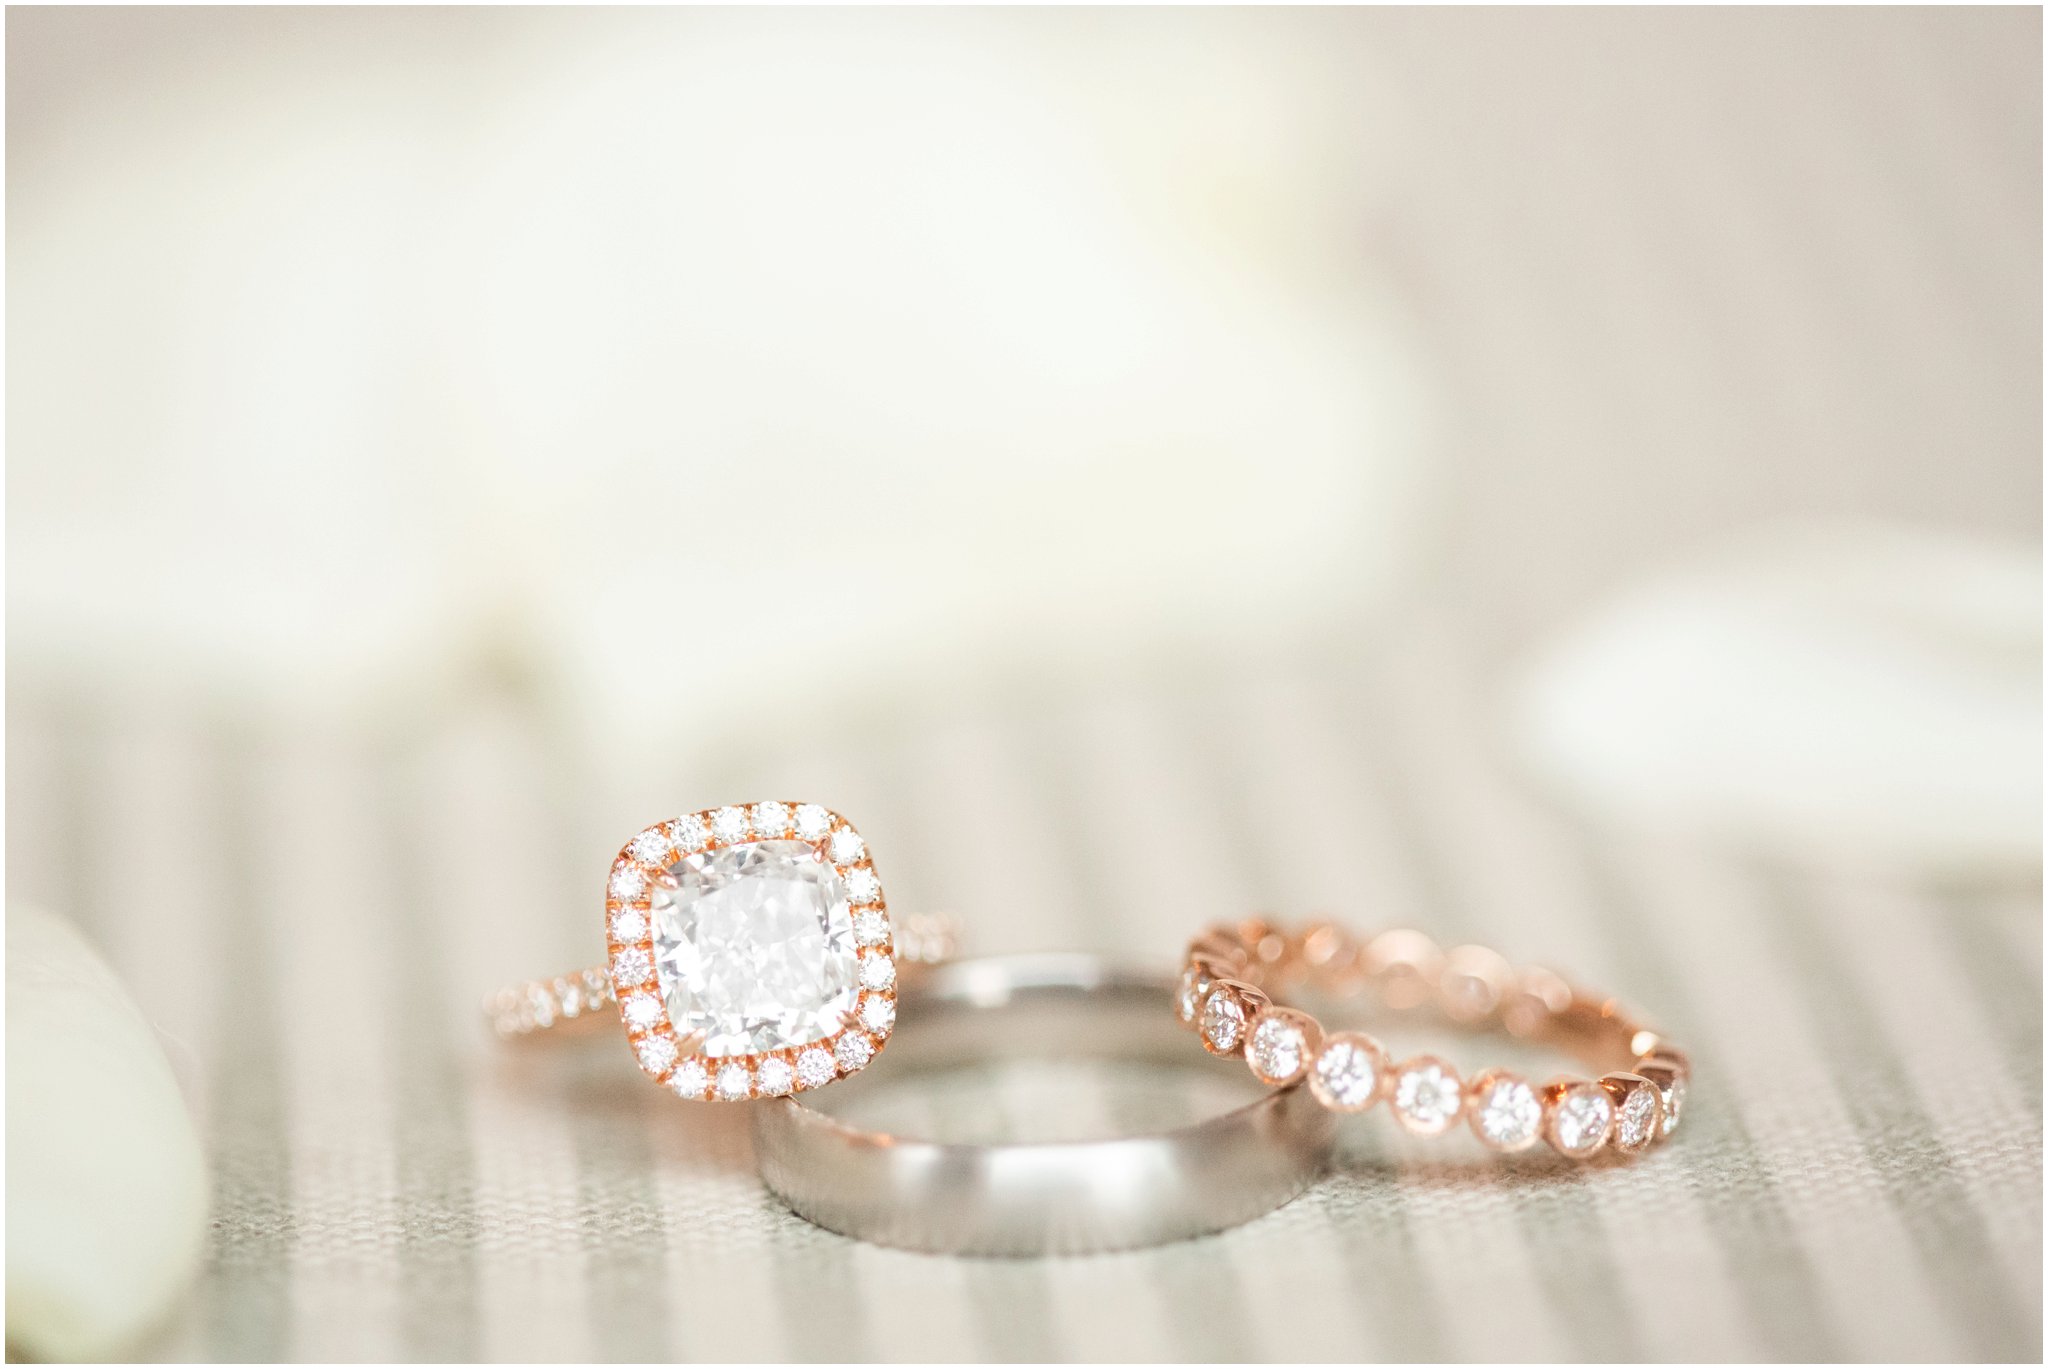 How to photograph the ring and get amazing detail shots at every wedding #photographyeducation #christarenephotography #photographybusiness